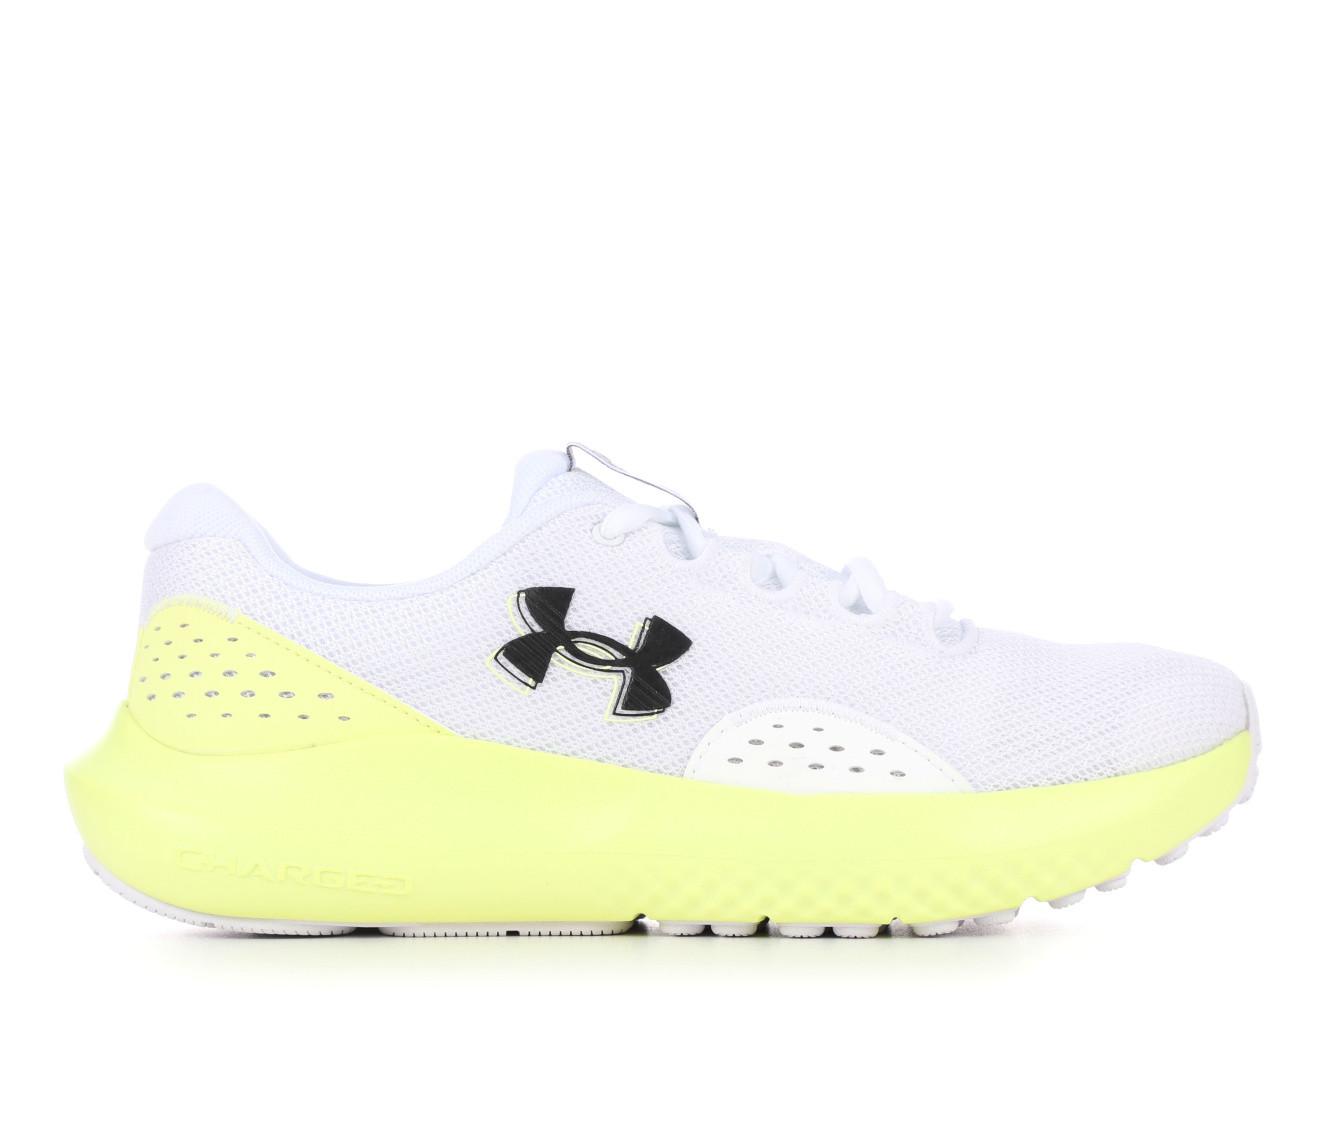 Women's Under Armour Surge 4 Running Shoes